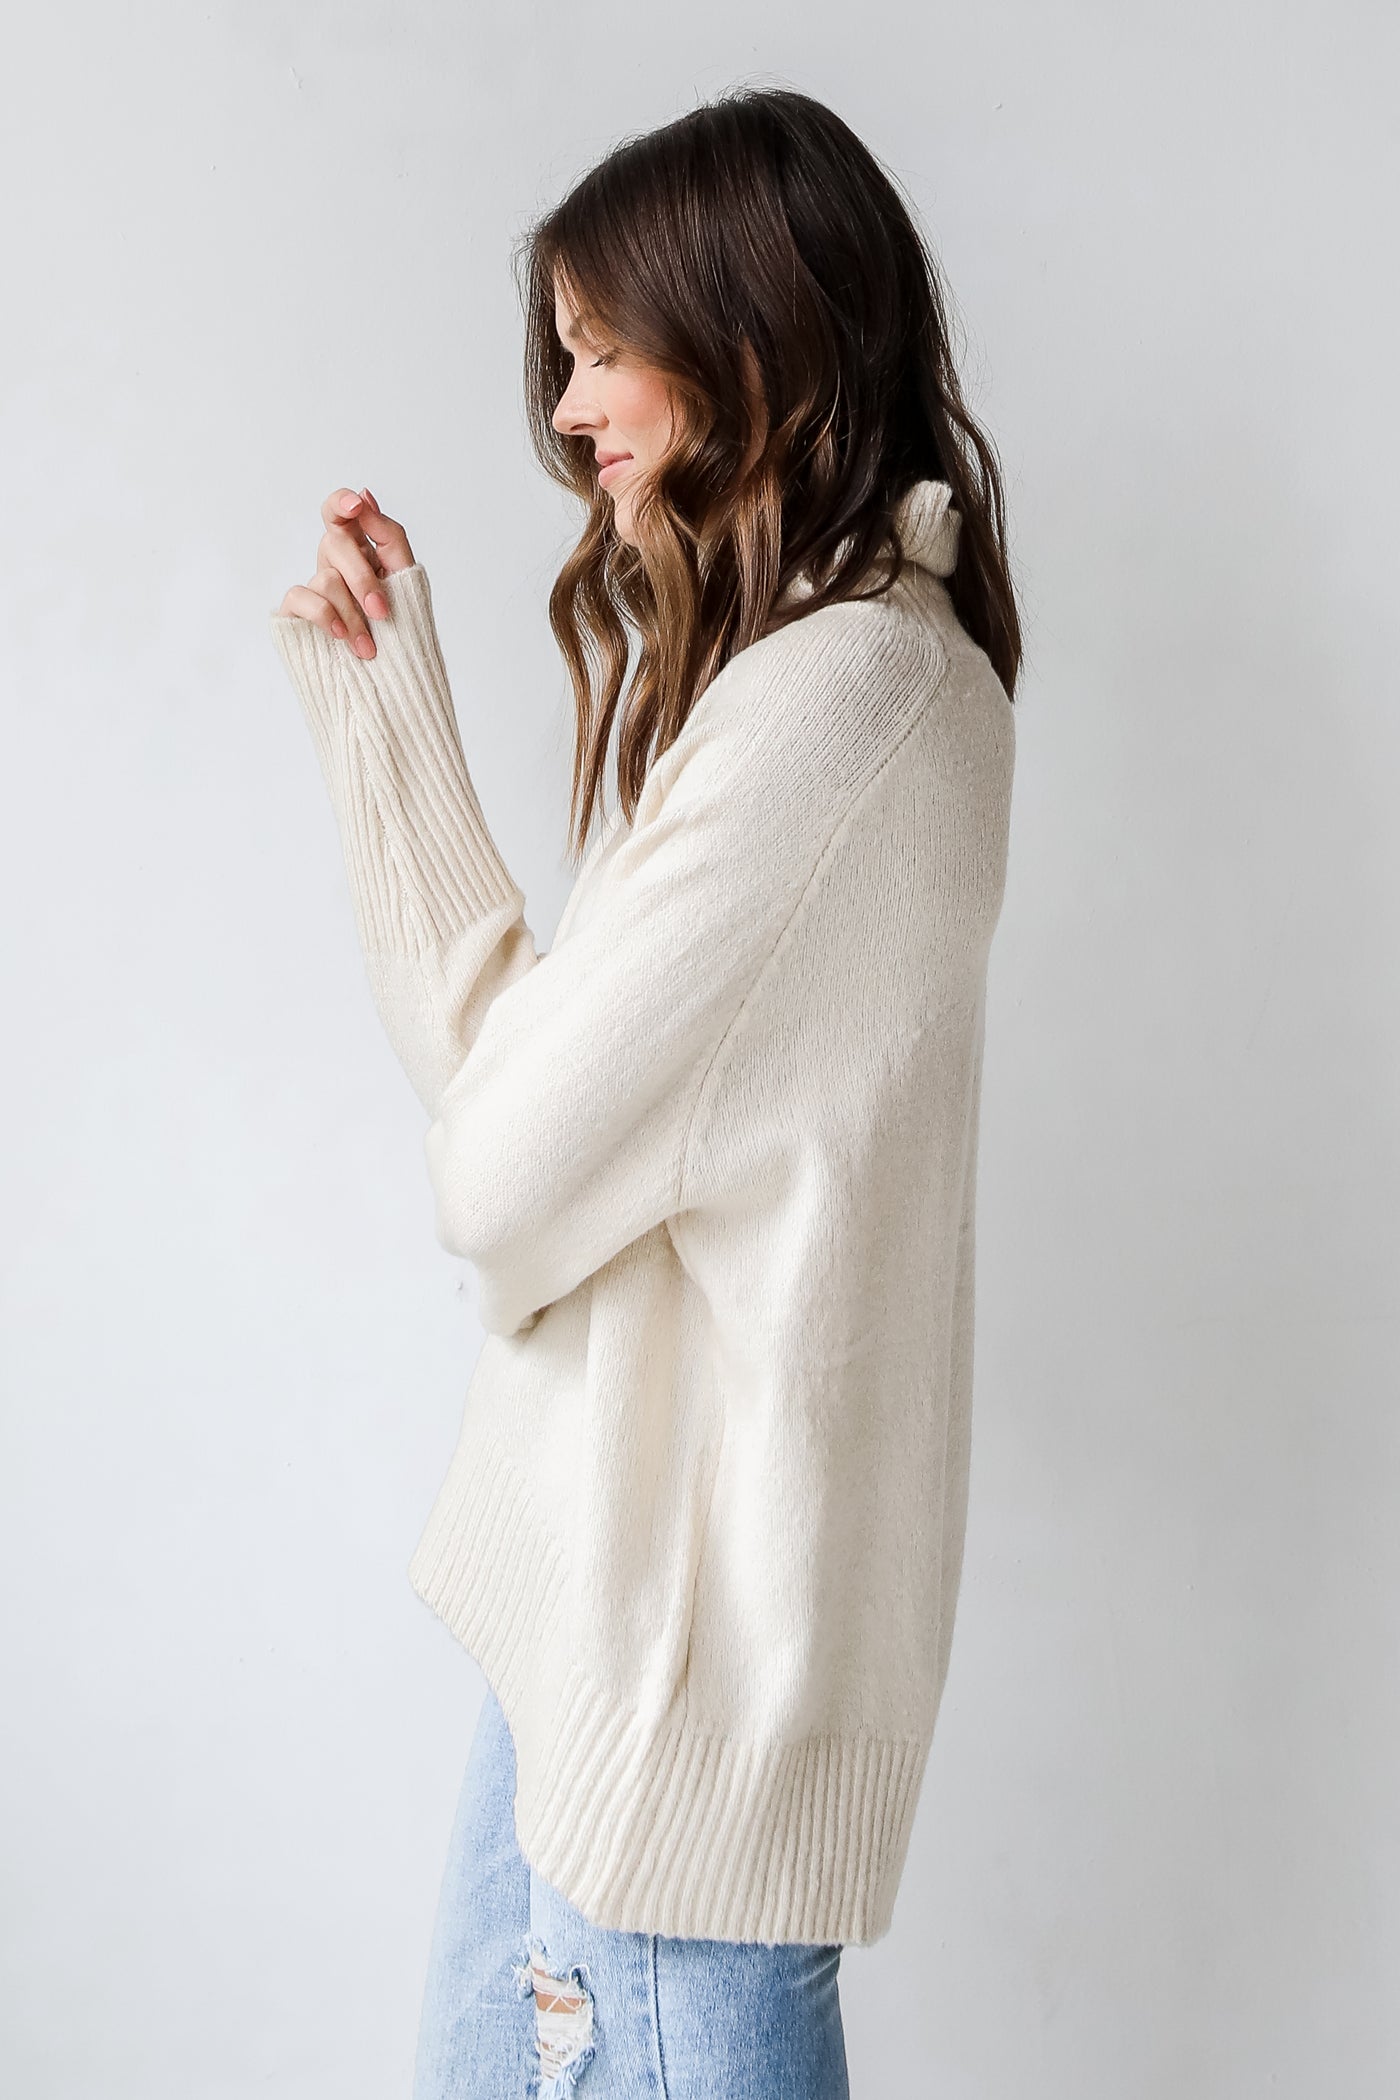 Turtleneck Sweater in ivory side view